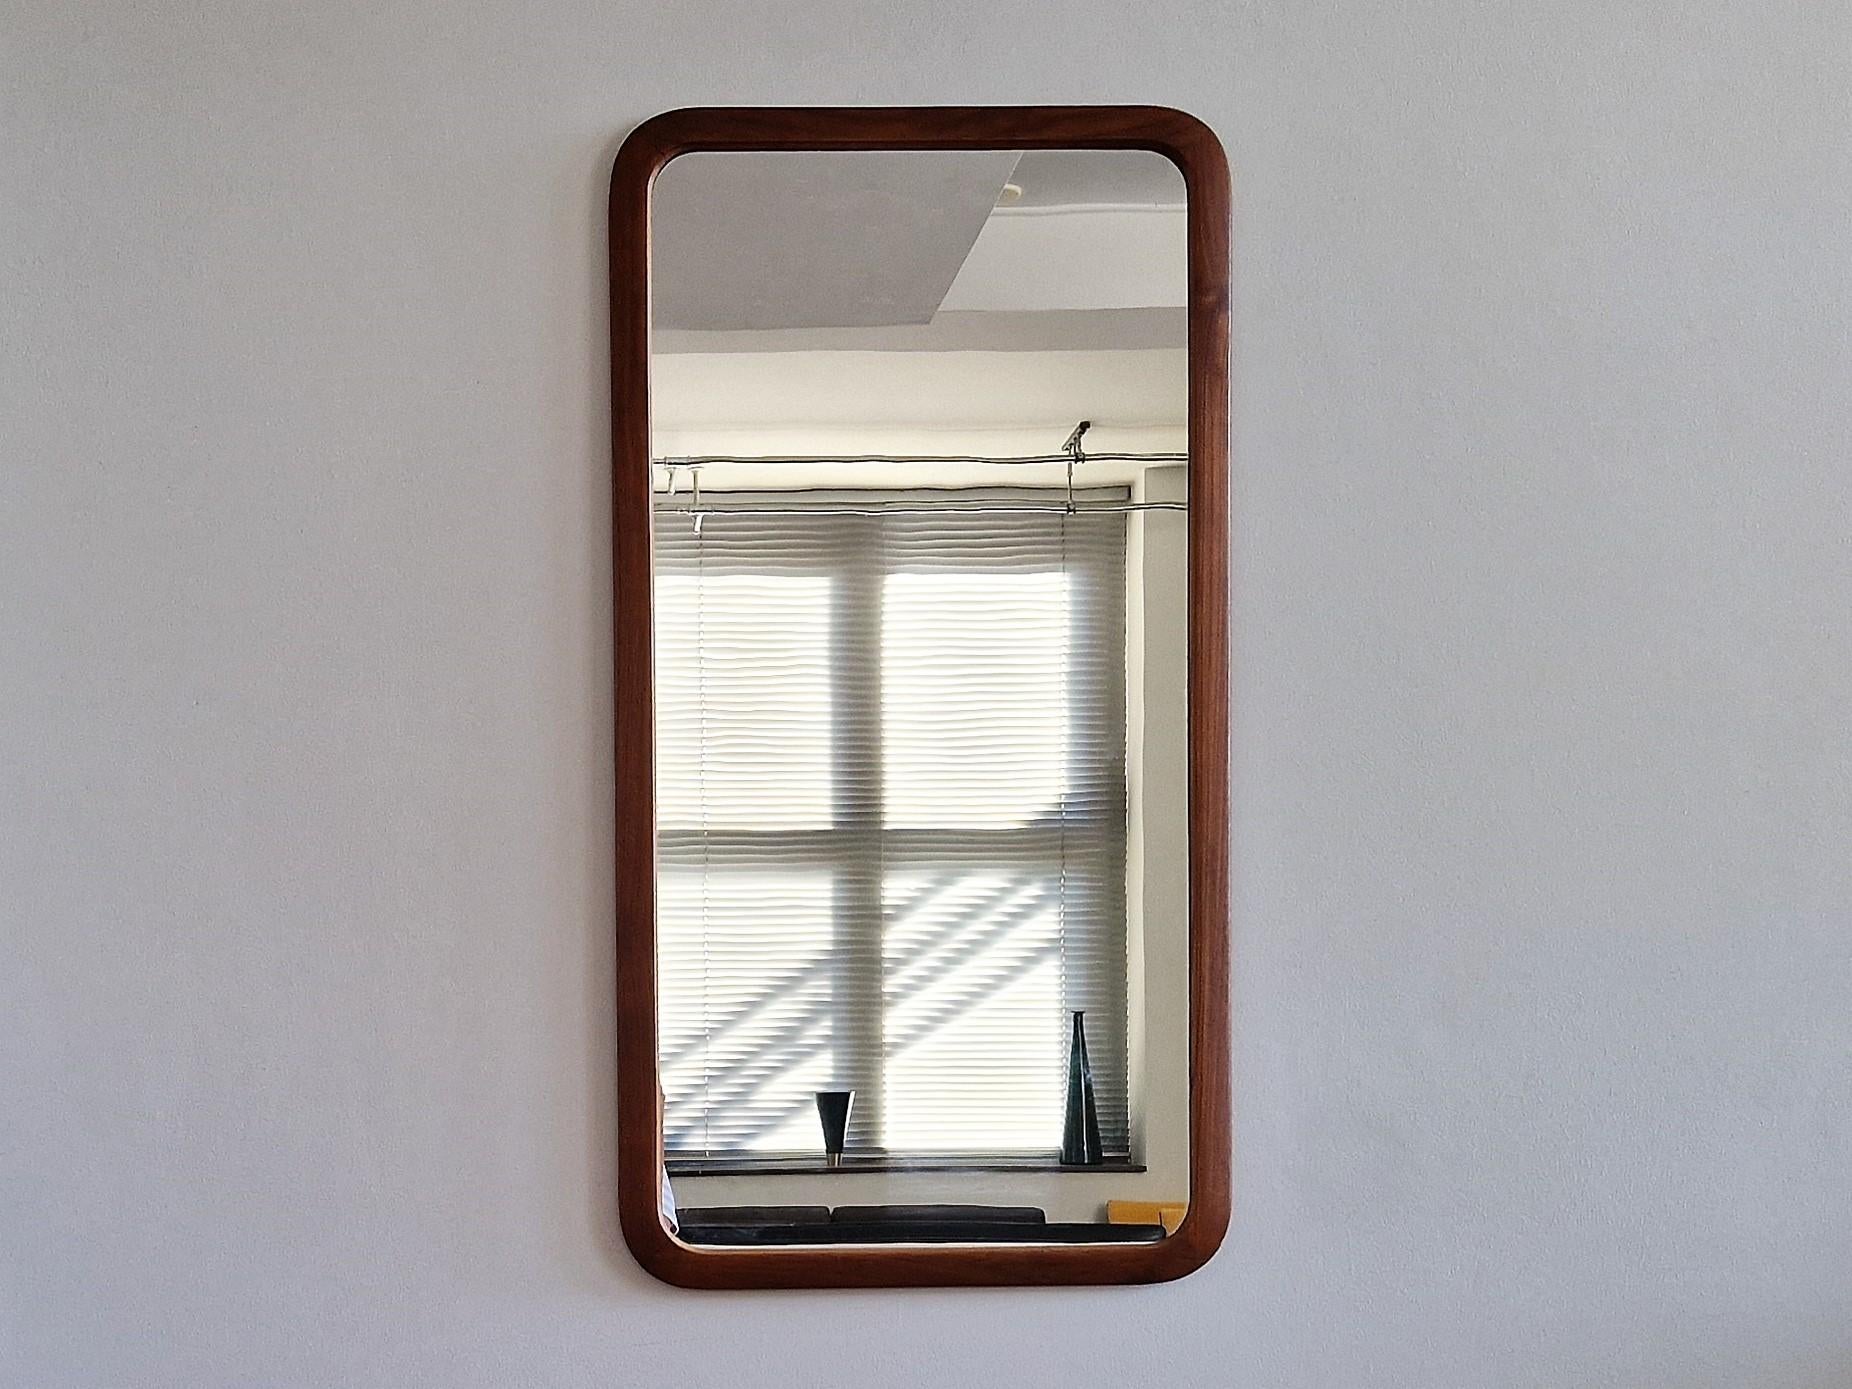 This very nice Danish mirror was likely to be made in the 1960's. It has a beautiful rectangle shape in a teak frame that was recently oiled. Both the frame and mirror part are in a good condition with signs of age and use, mainly some discoloration